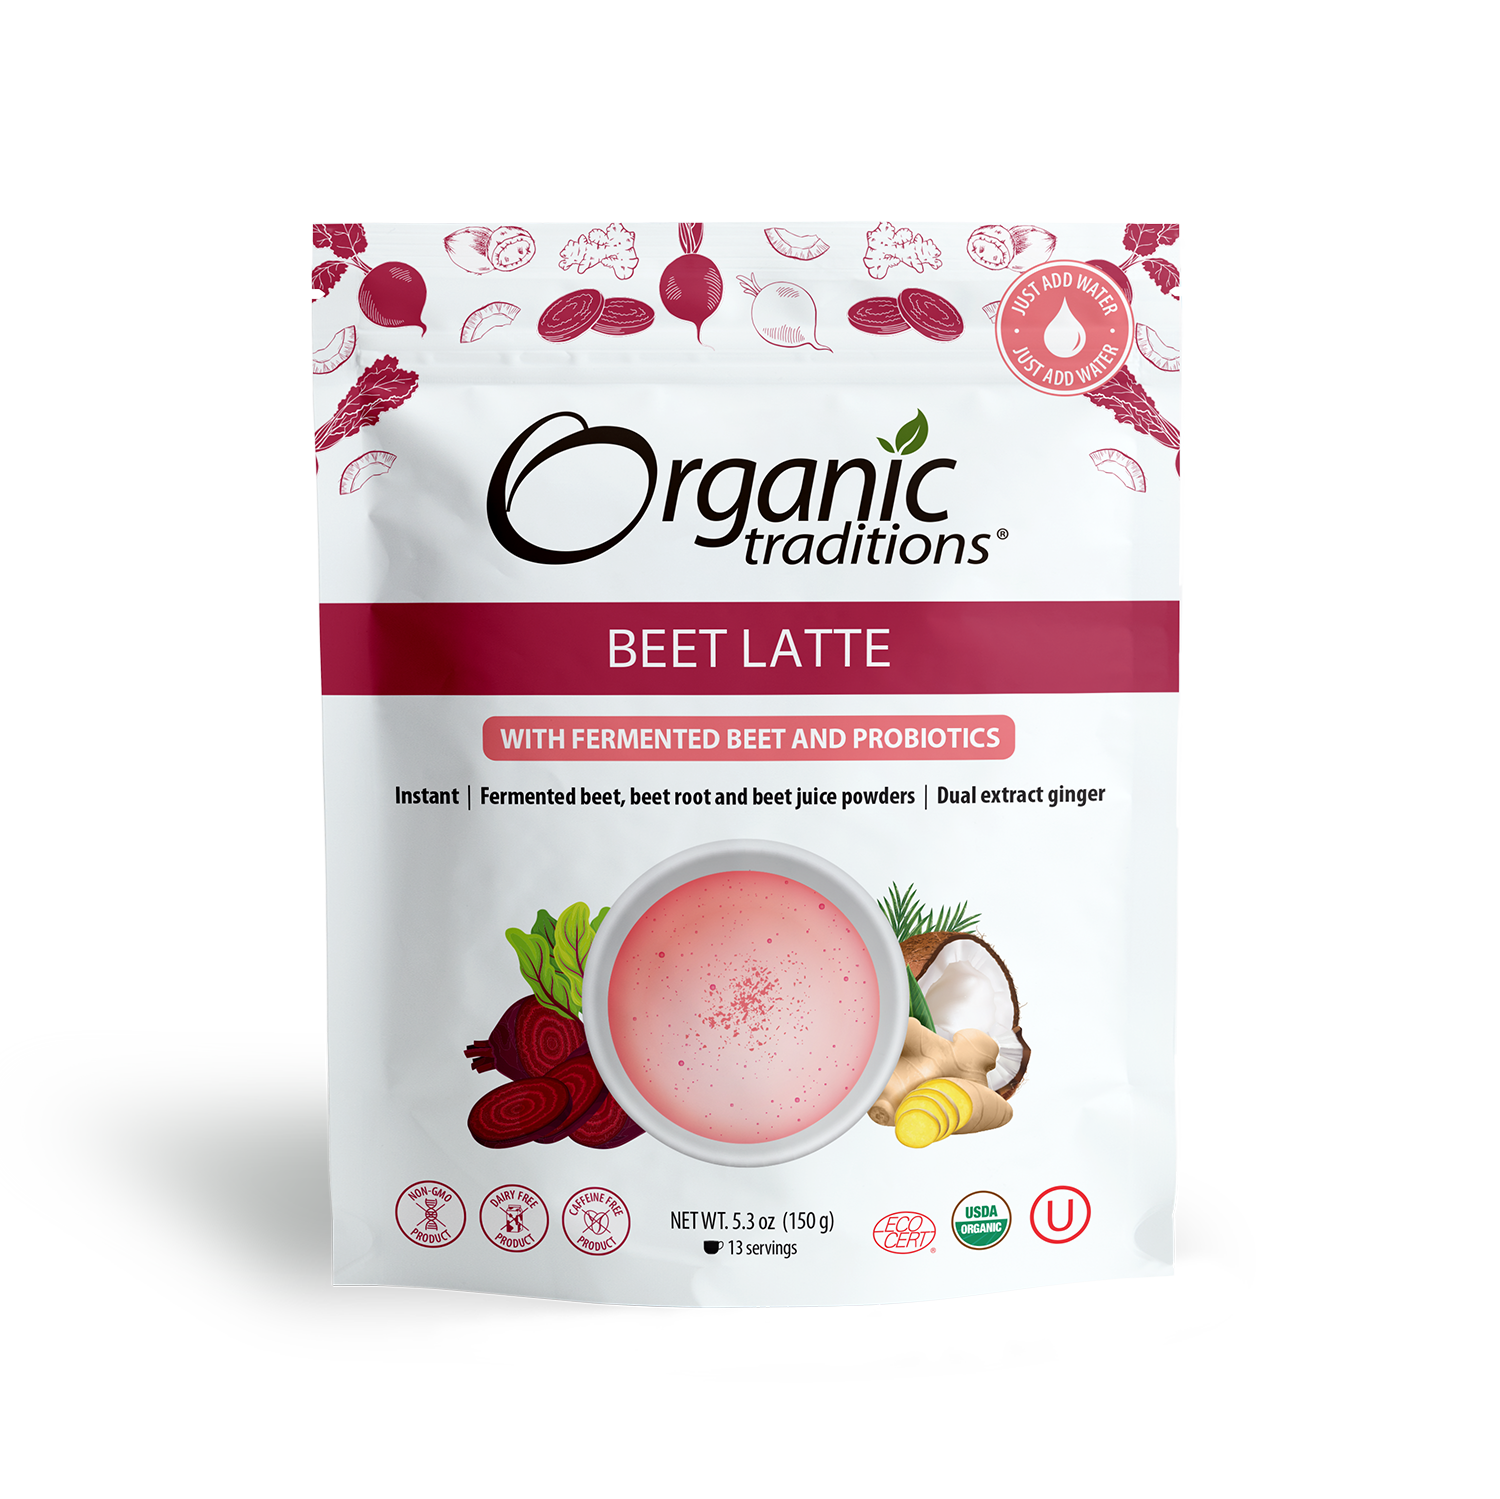 organic traditions beet latte with fermented beet and probiotics front of bag image